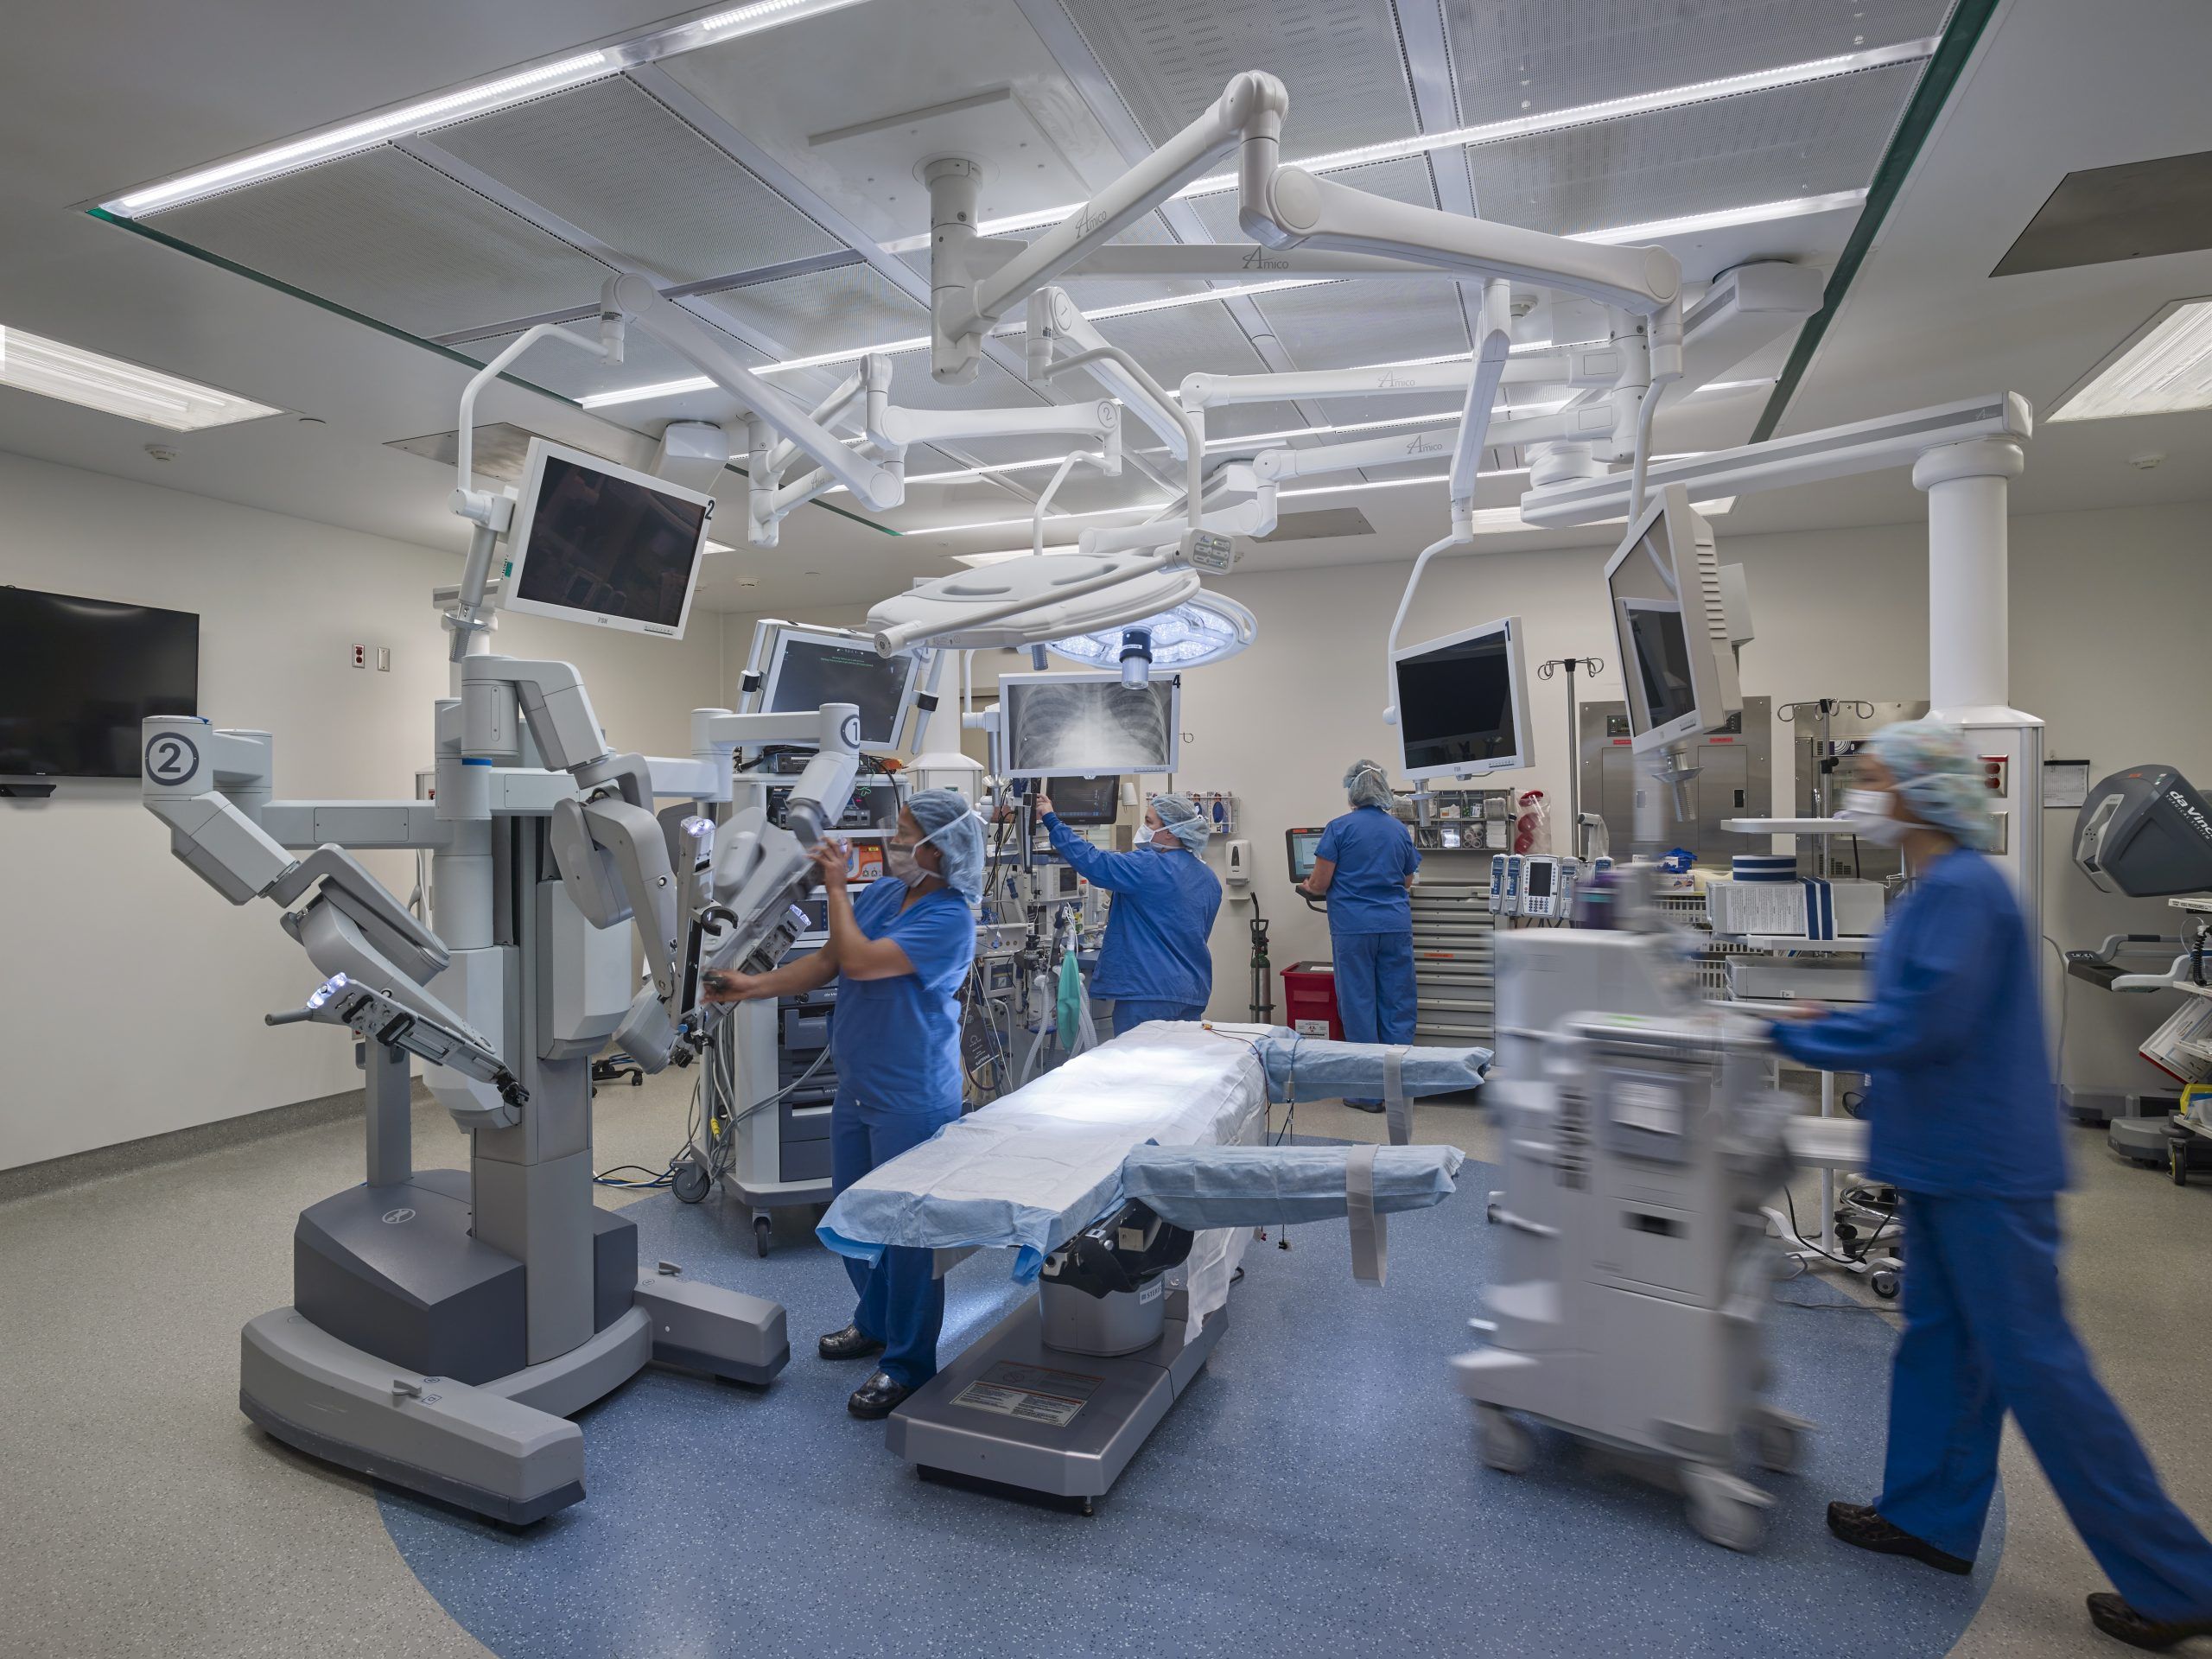 Medical staff in blue scrubs set up an operation room with robotics and x-ray capabilities